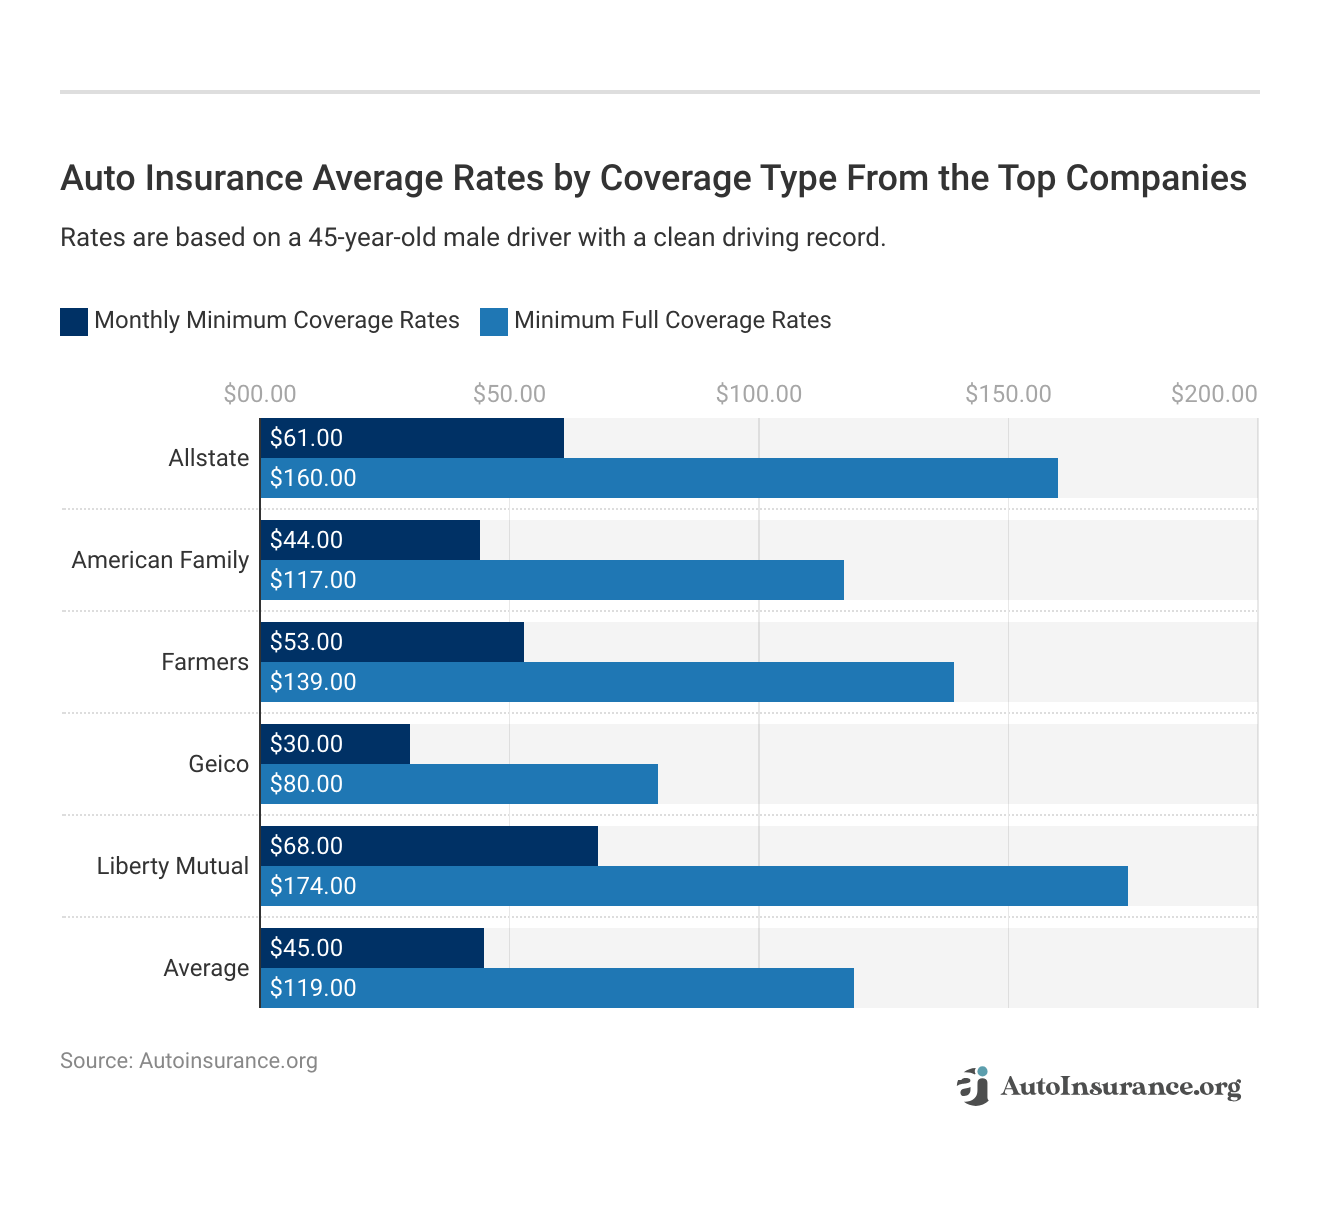 <h3>Auto Insurance Average Rates by Coverage Type From the Top Companies</h3>